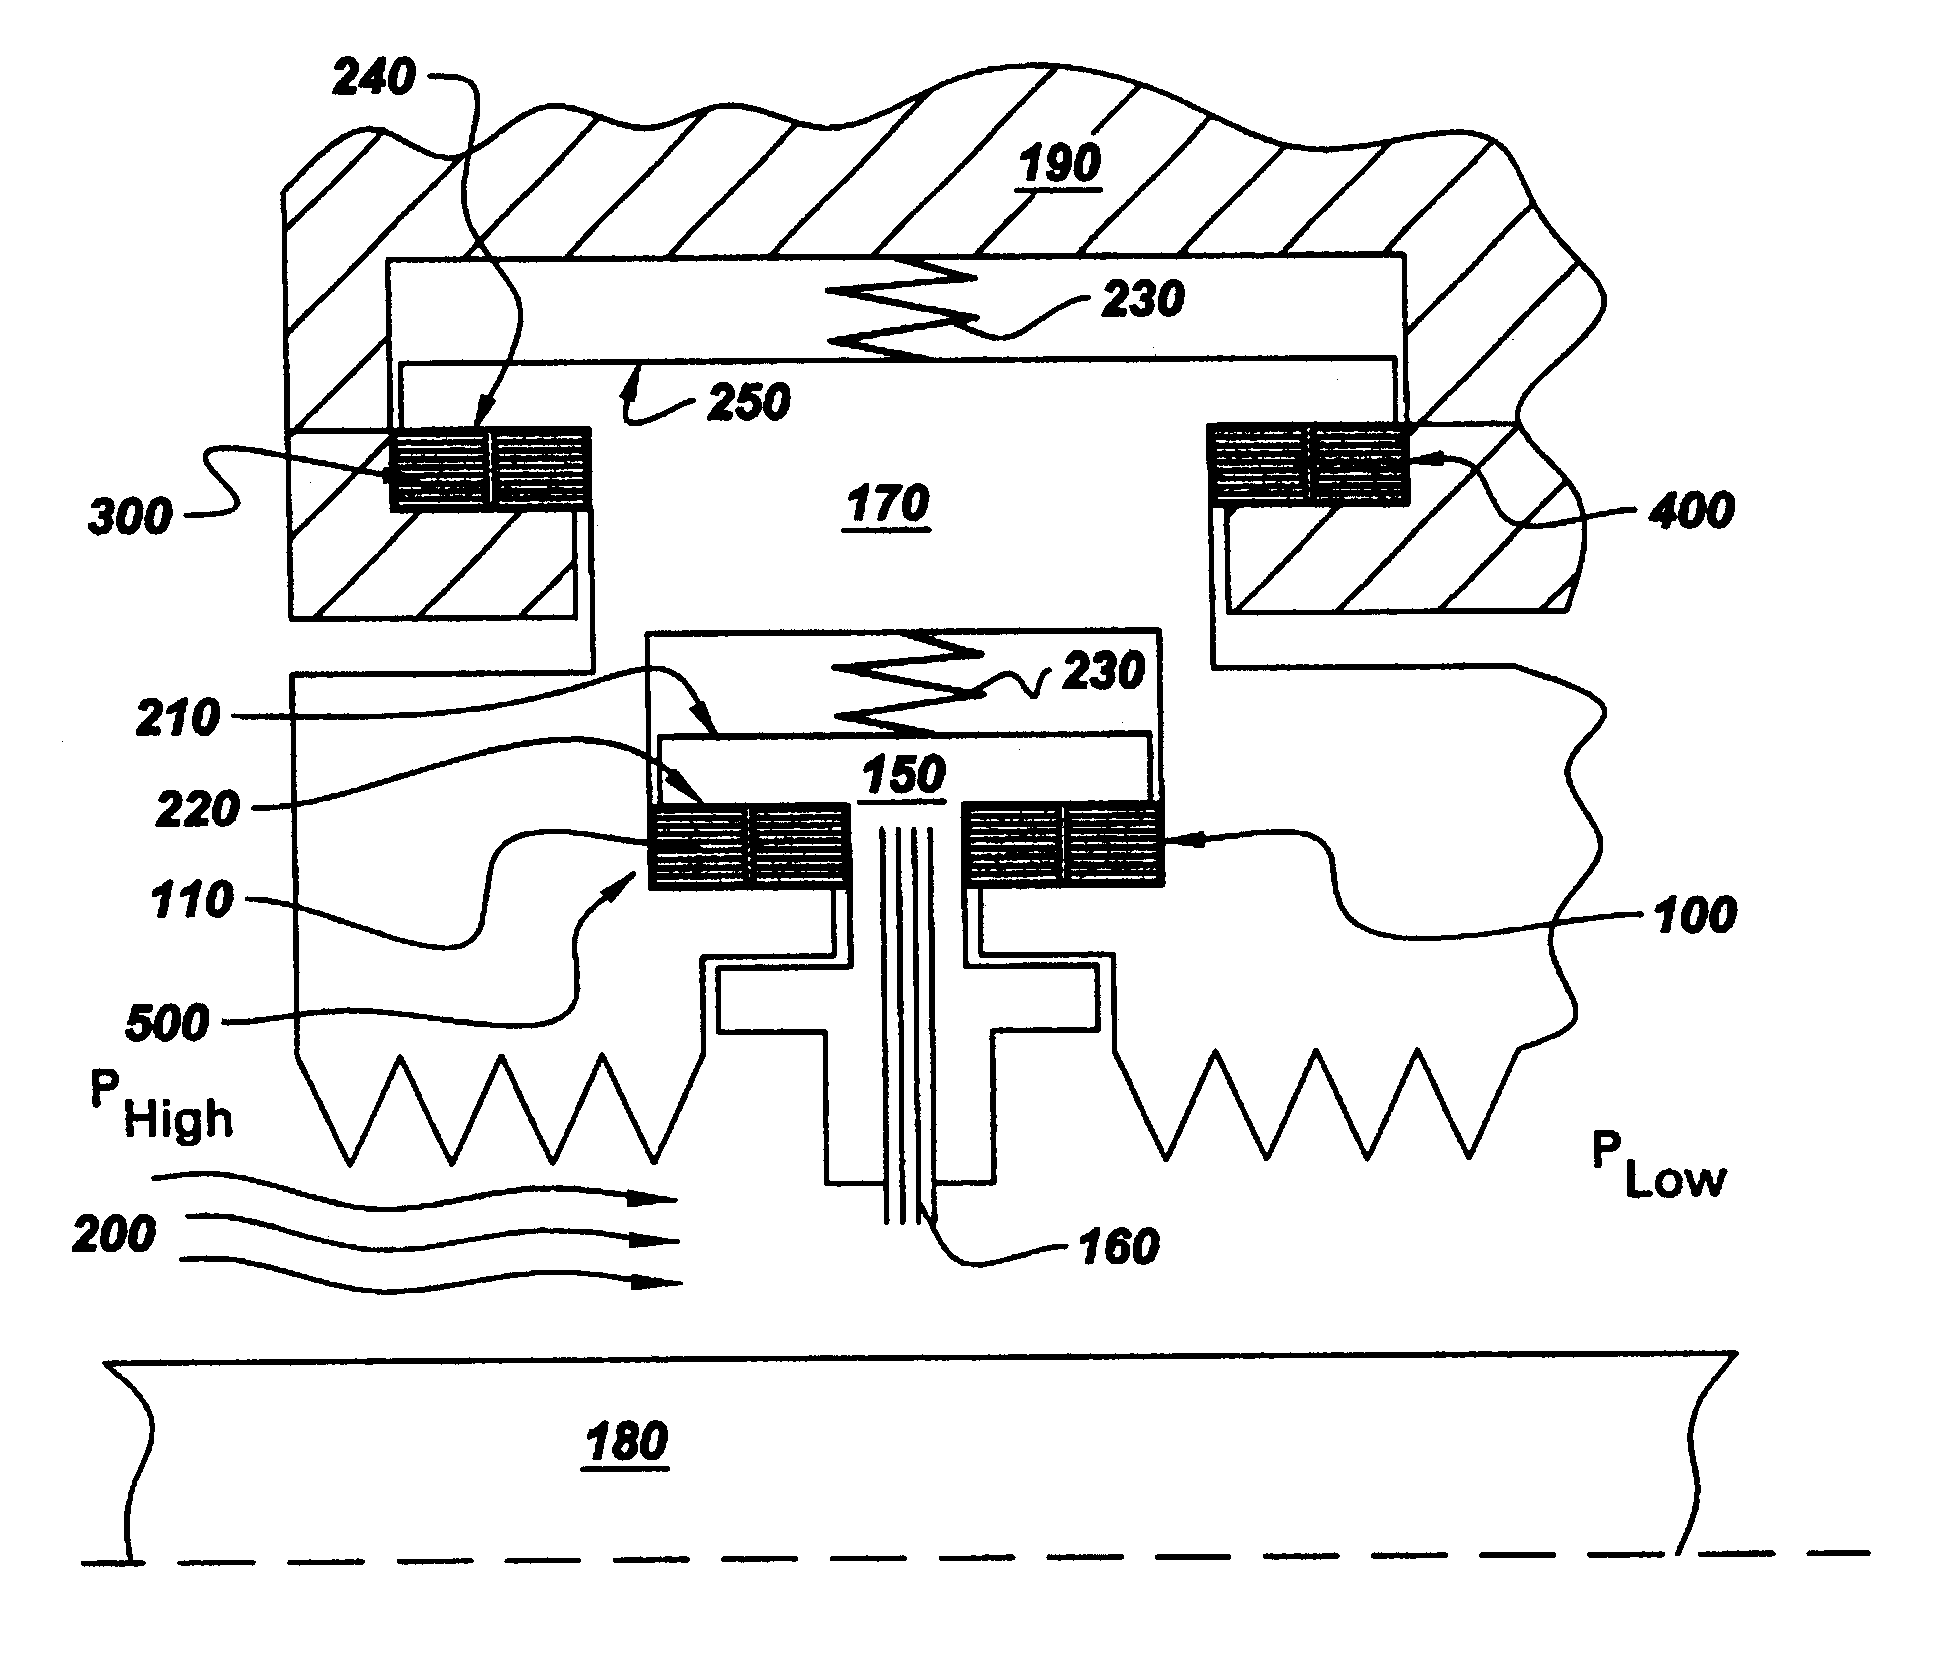 Actuating mechanism for a turbine and method of retrofitting